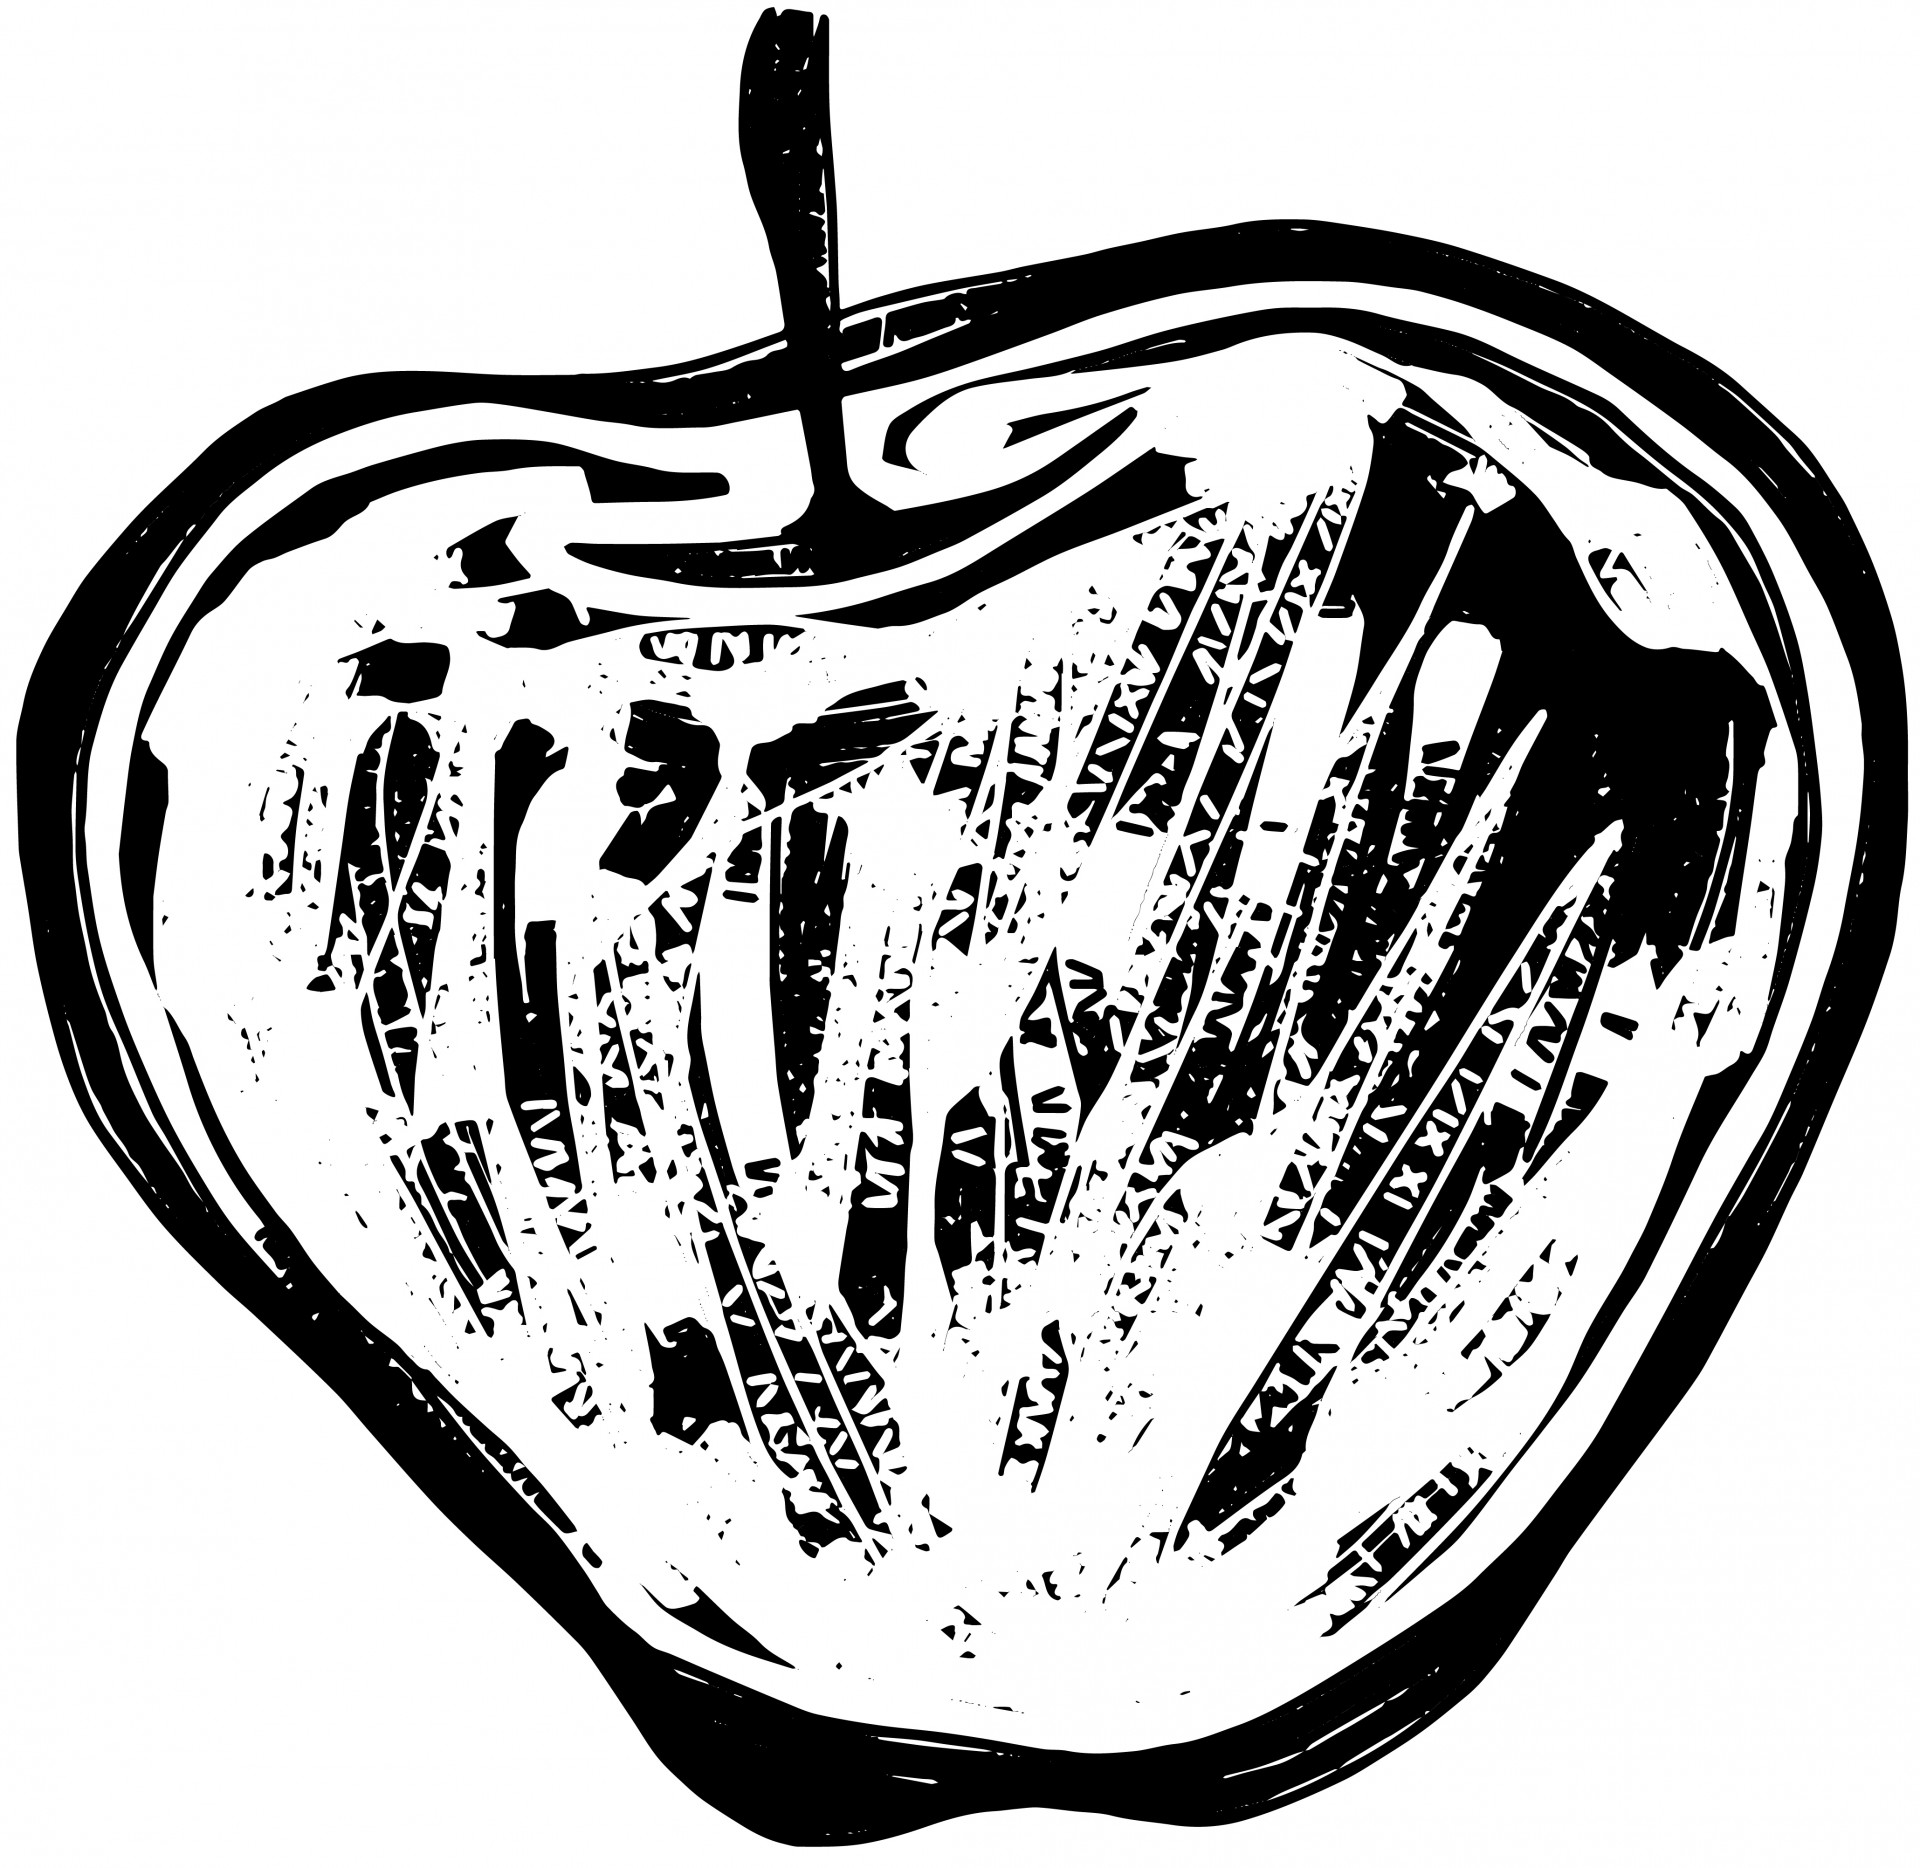 Hand drawn digital doodle of an apple in the style of a woodcut illustration.